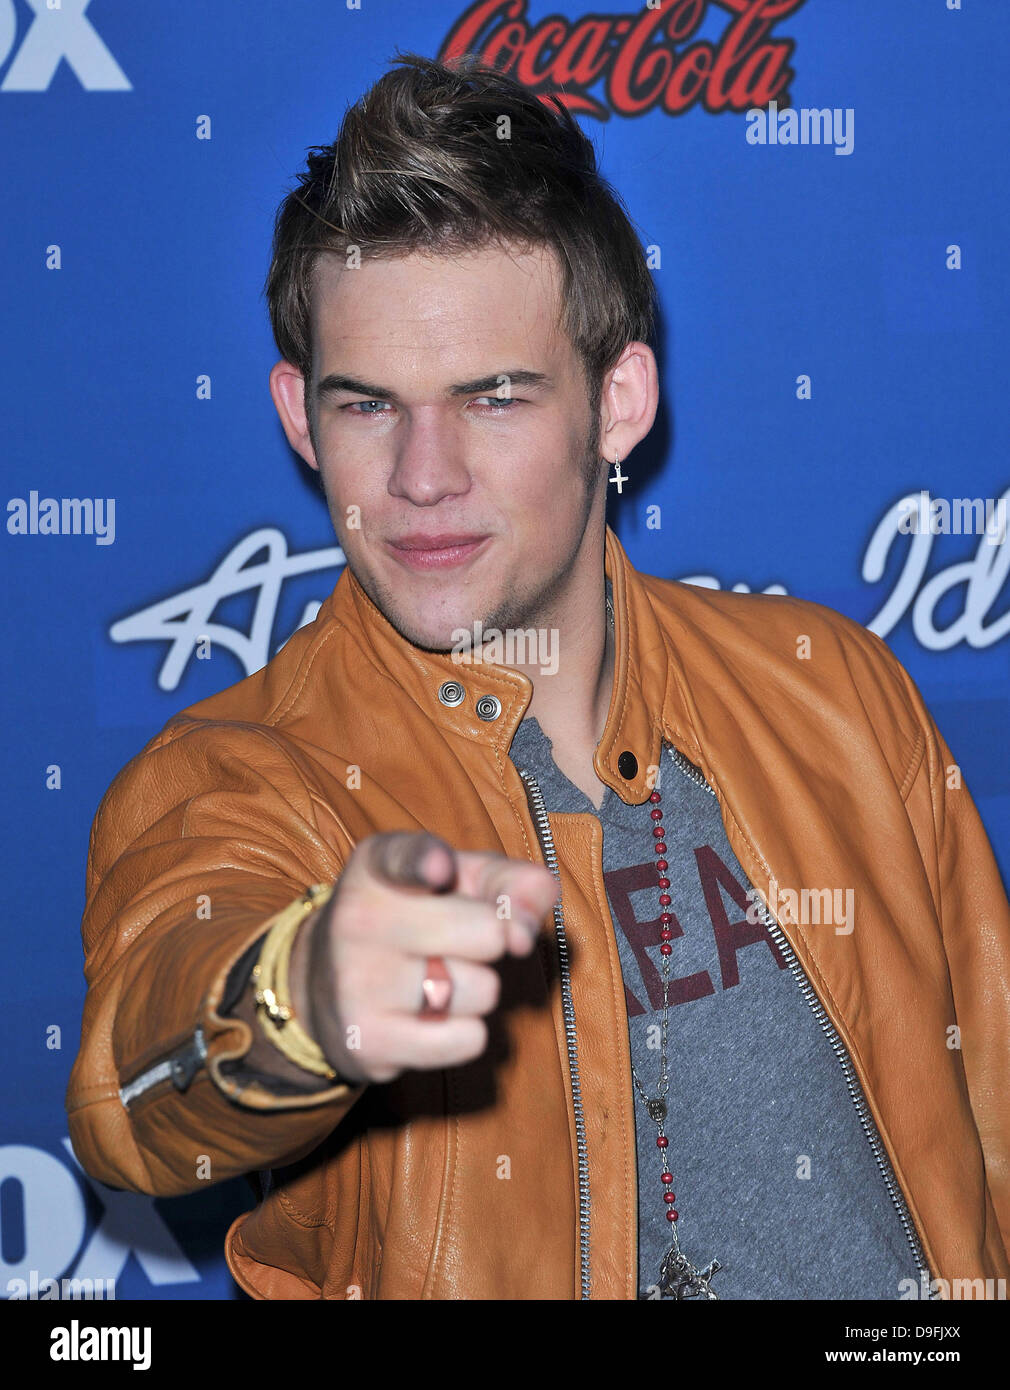 James Durbin The American Idol Season 10 Top 13 Finalists Party held at the Grove rooftop Los Angeles, California - 03.03.11 Stock Photo